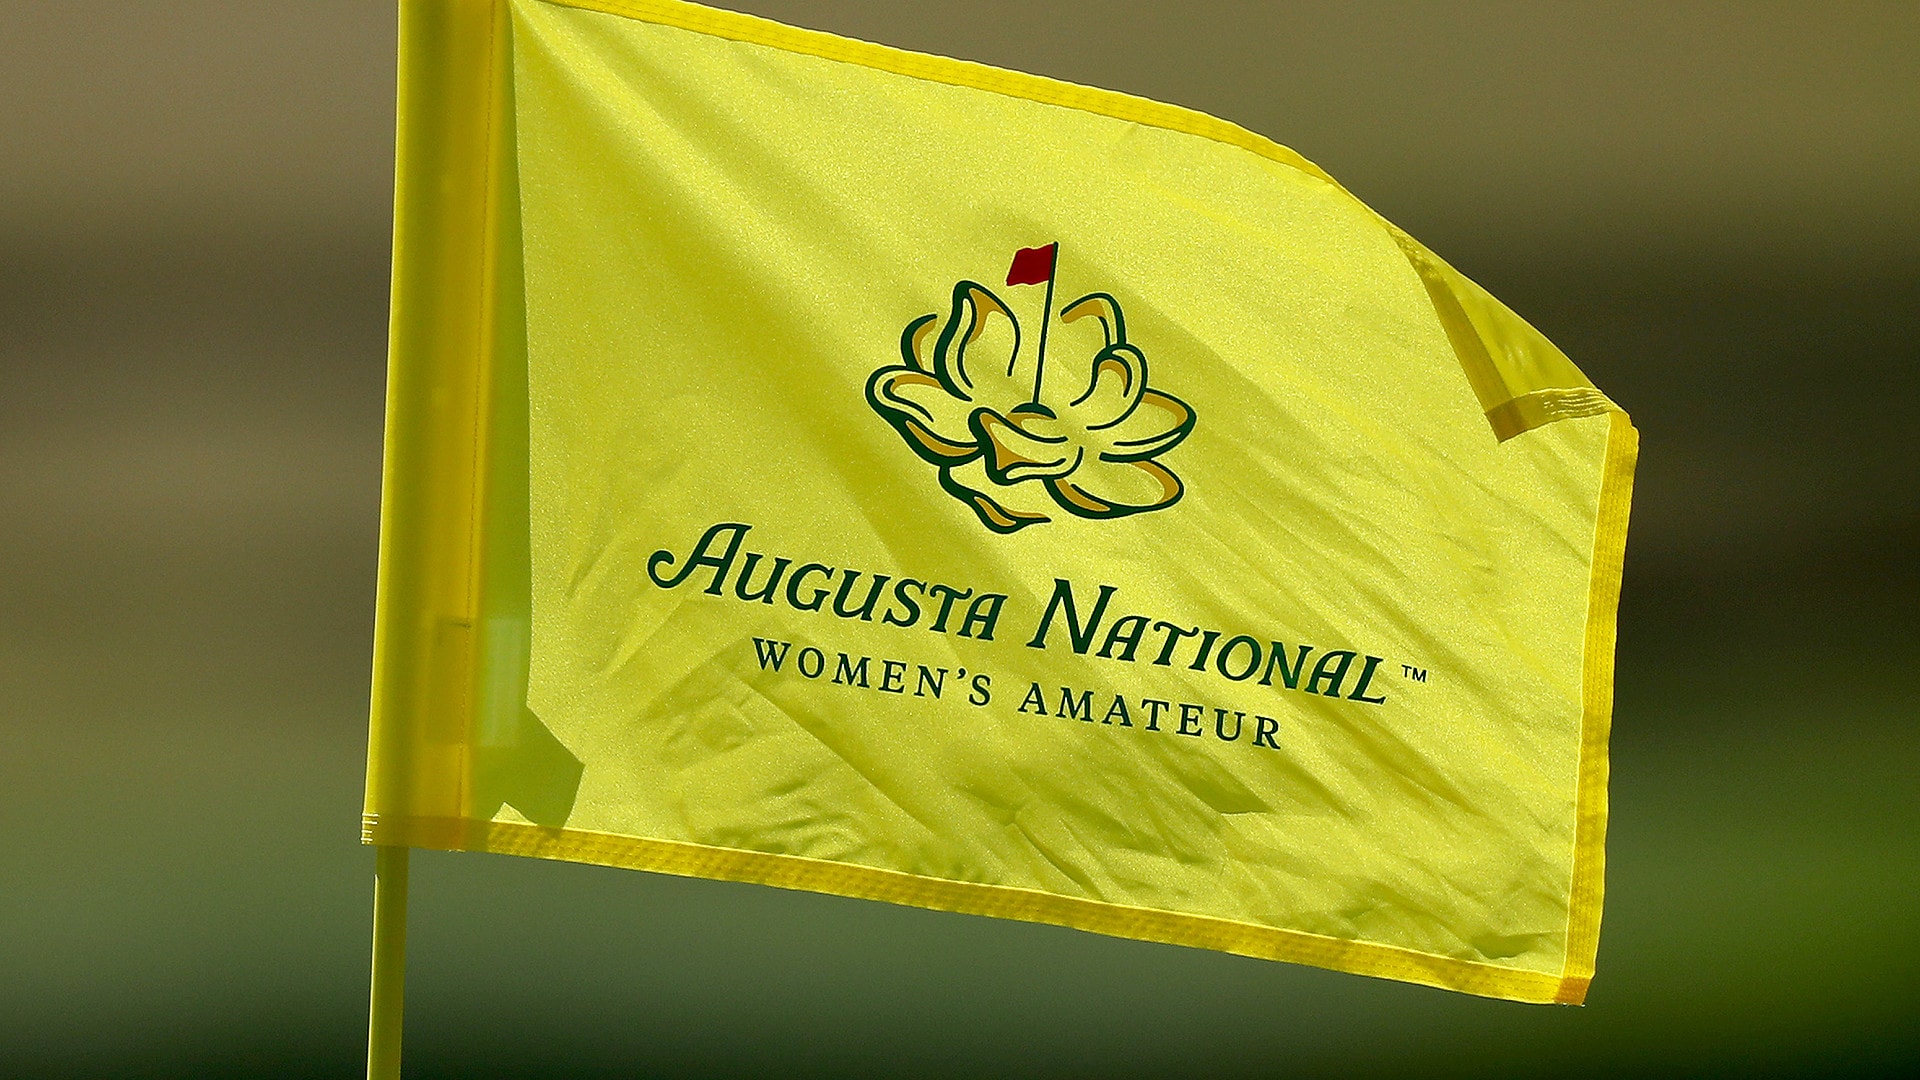 Field announced for 2021 Augusta National Women’s Amateur